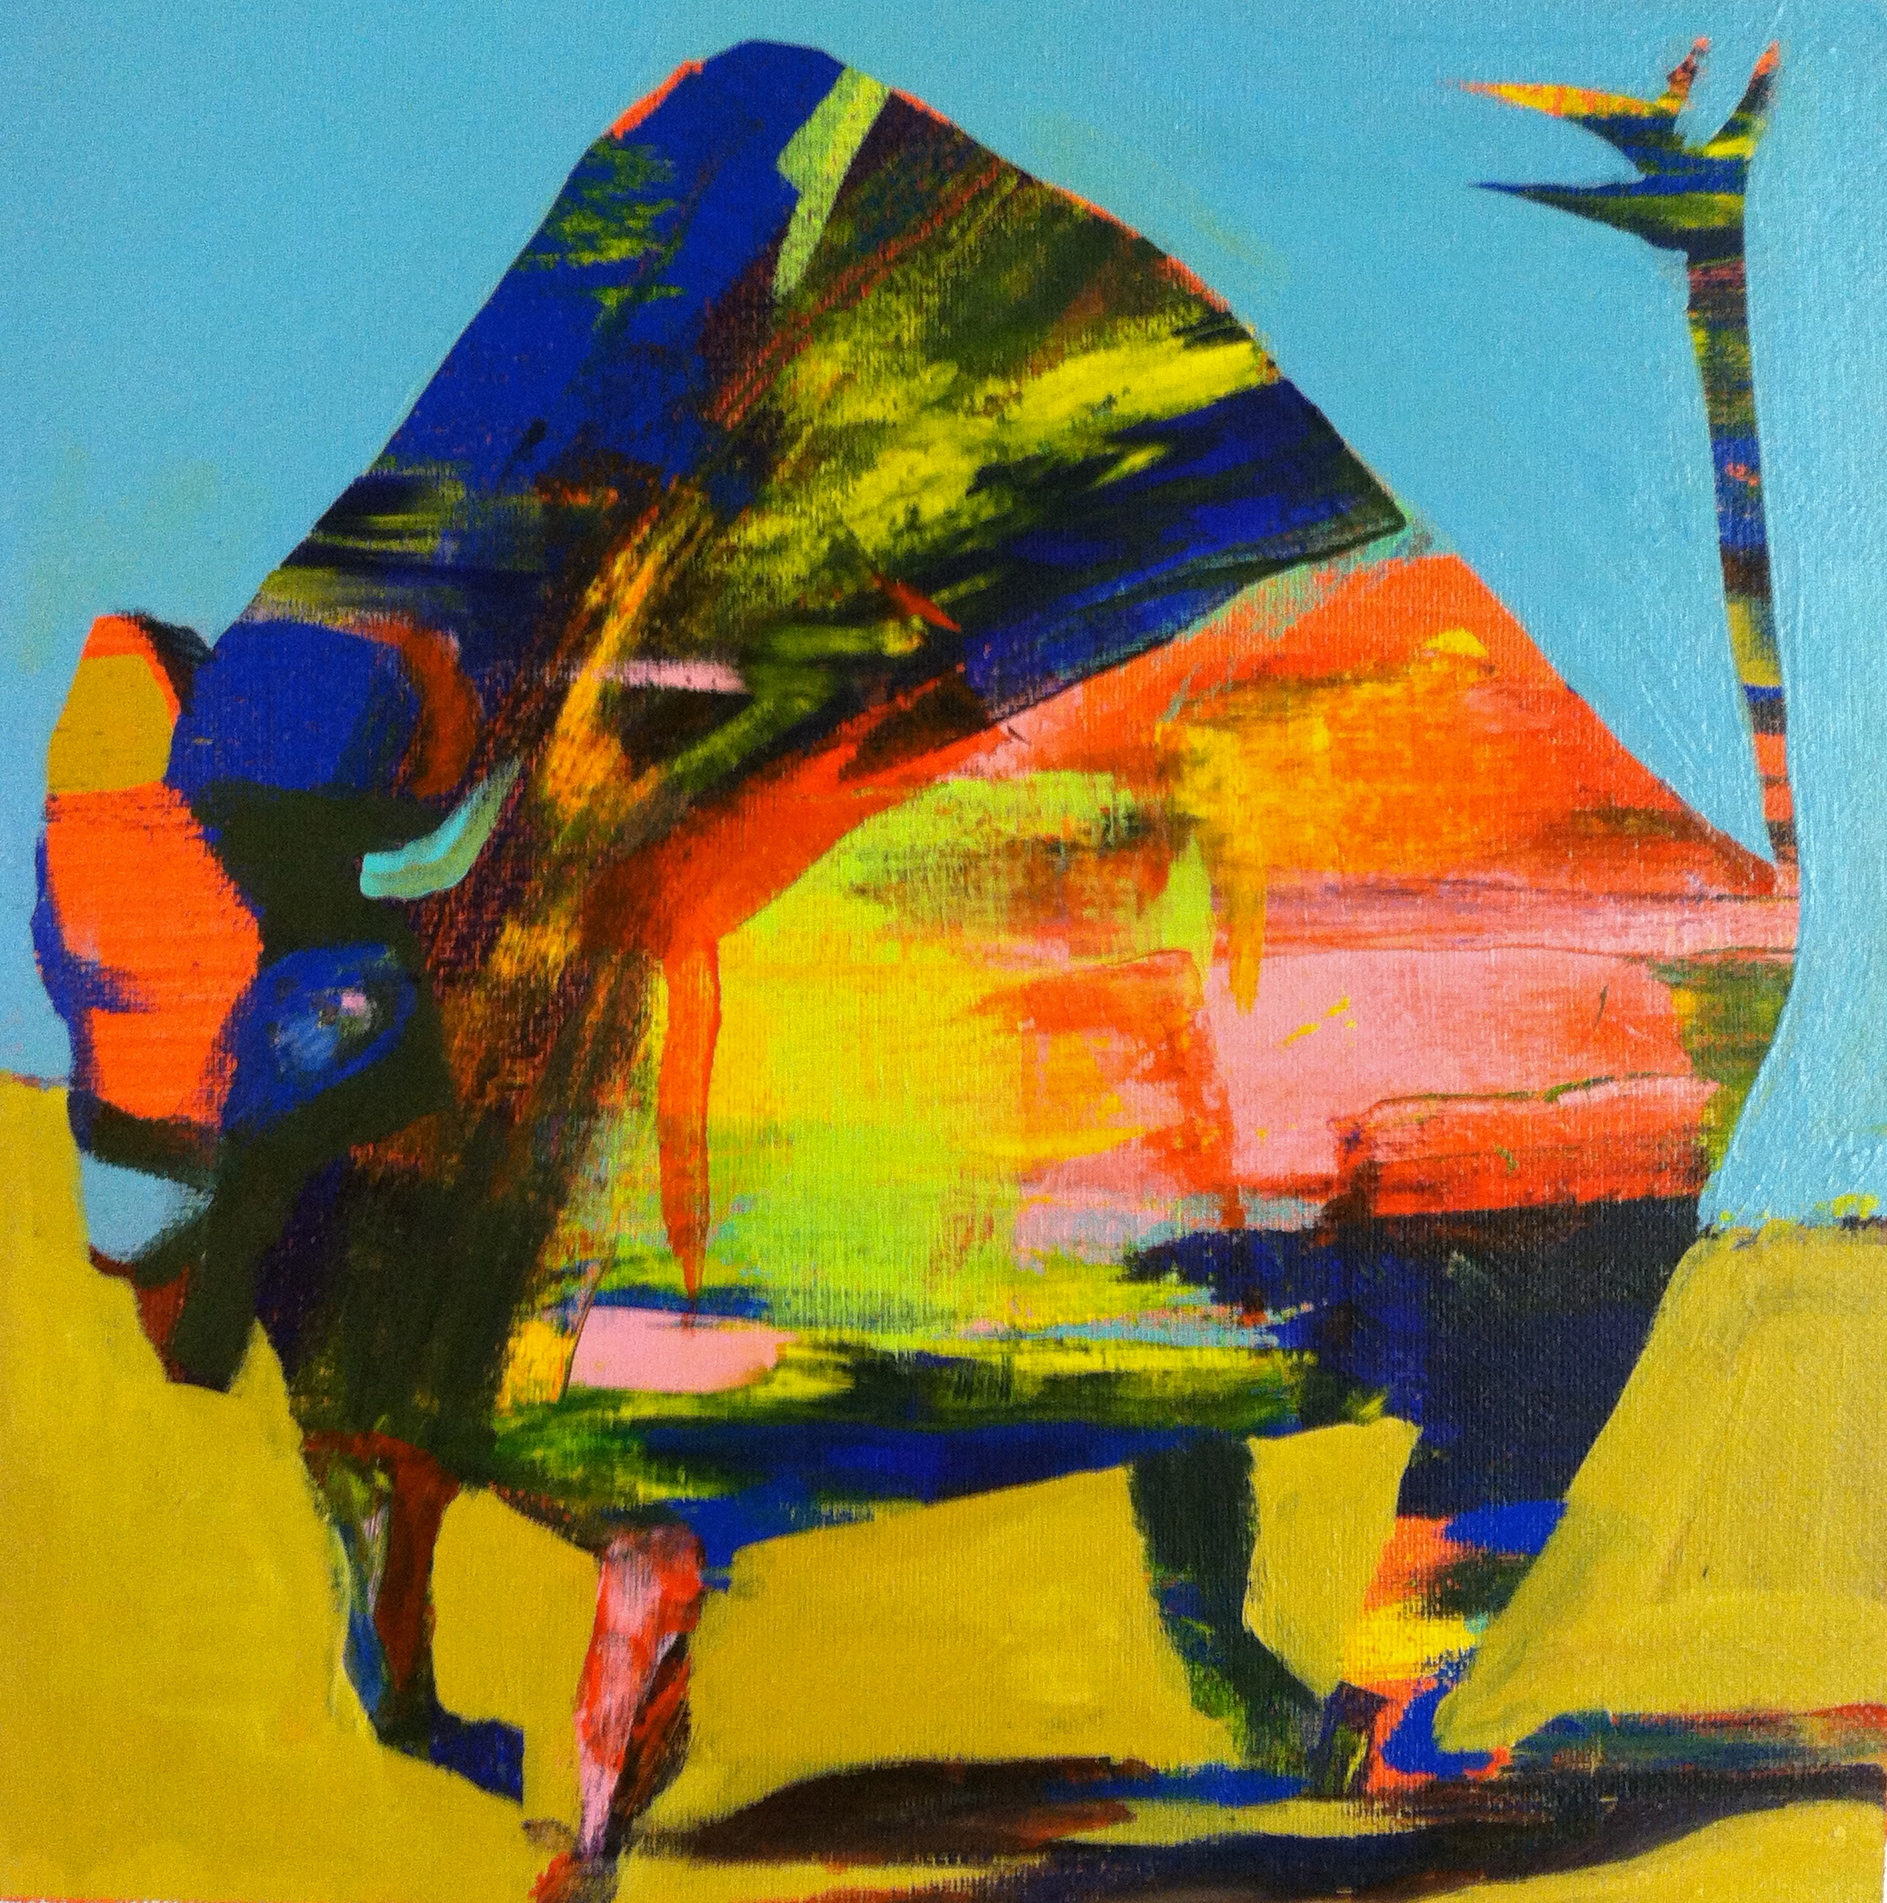  Bison #3, acrylic on canvas, 12x12 inches, 2015 